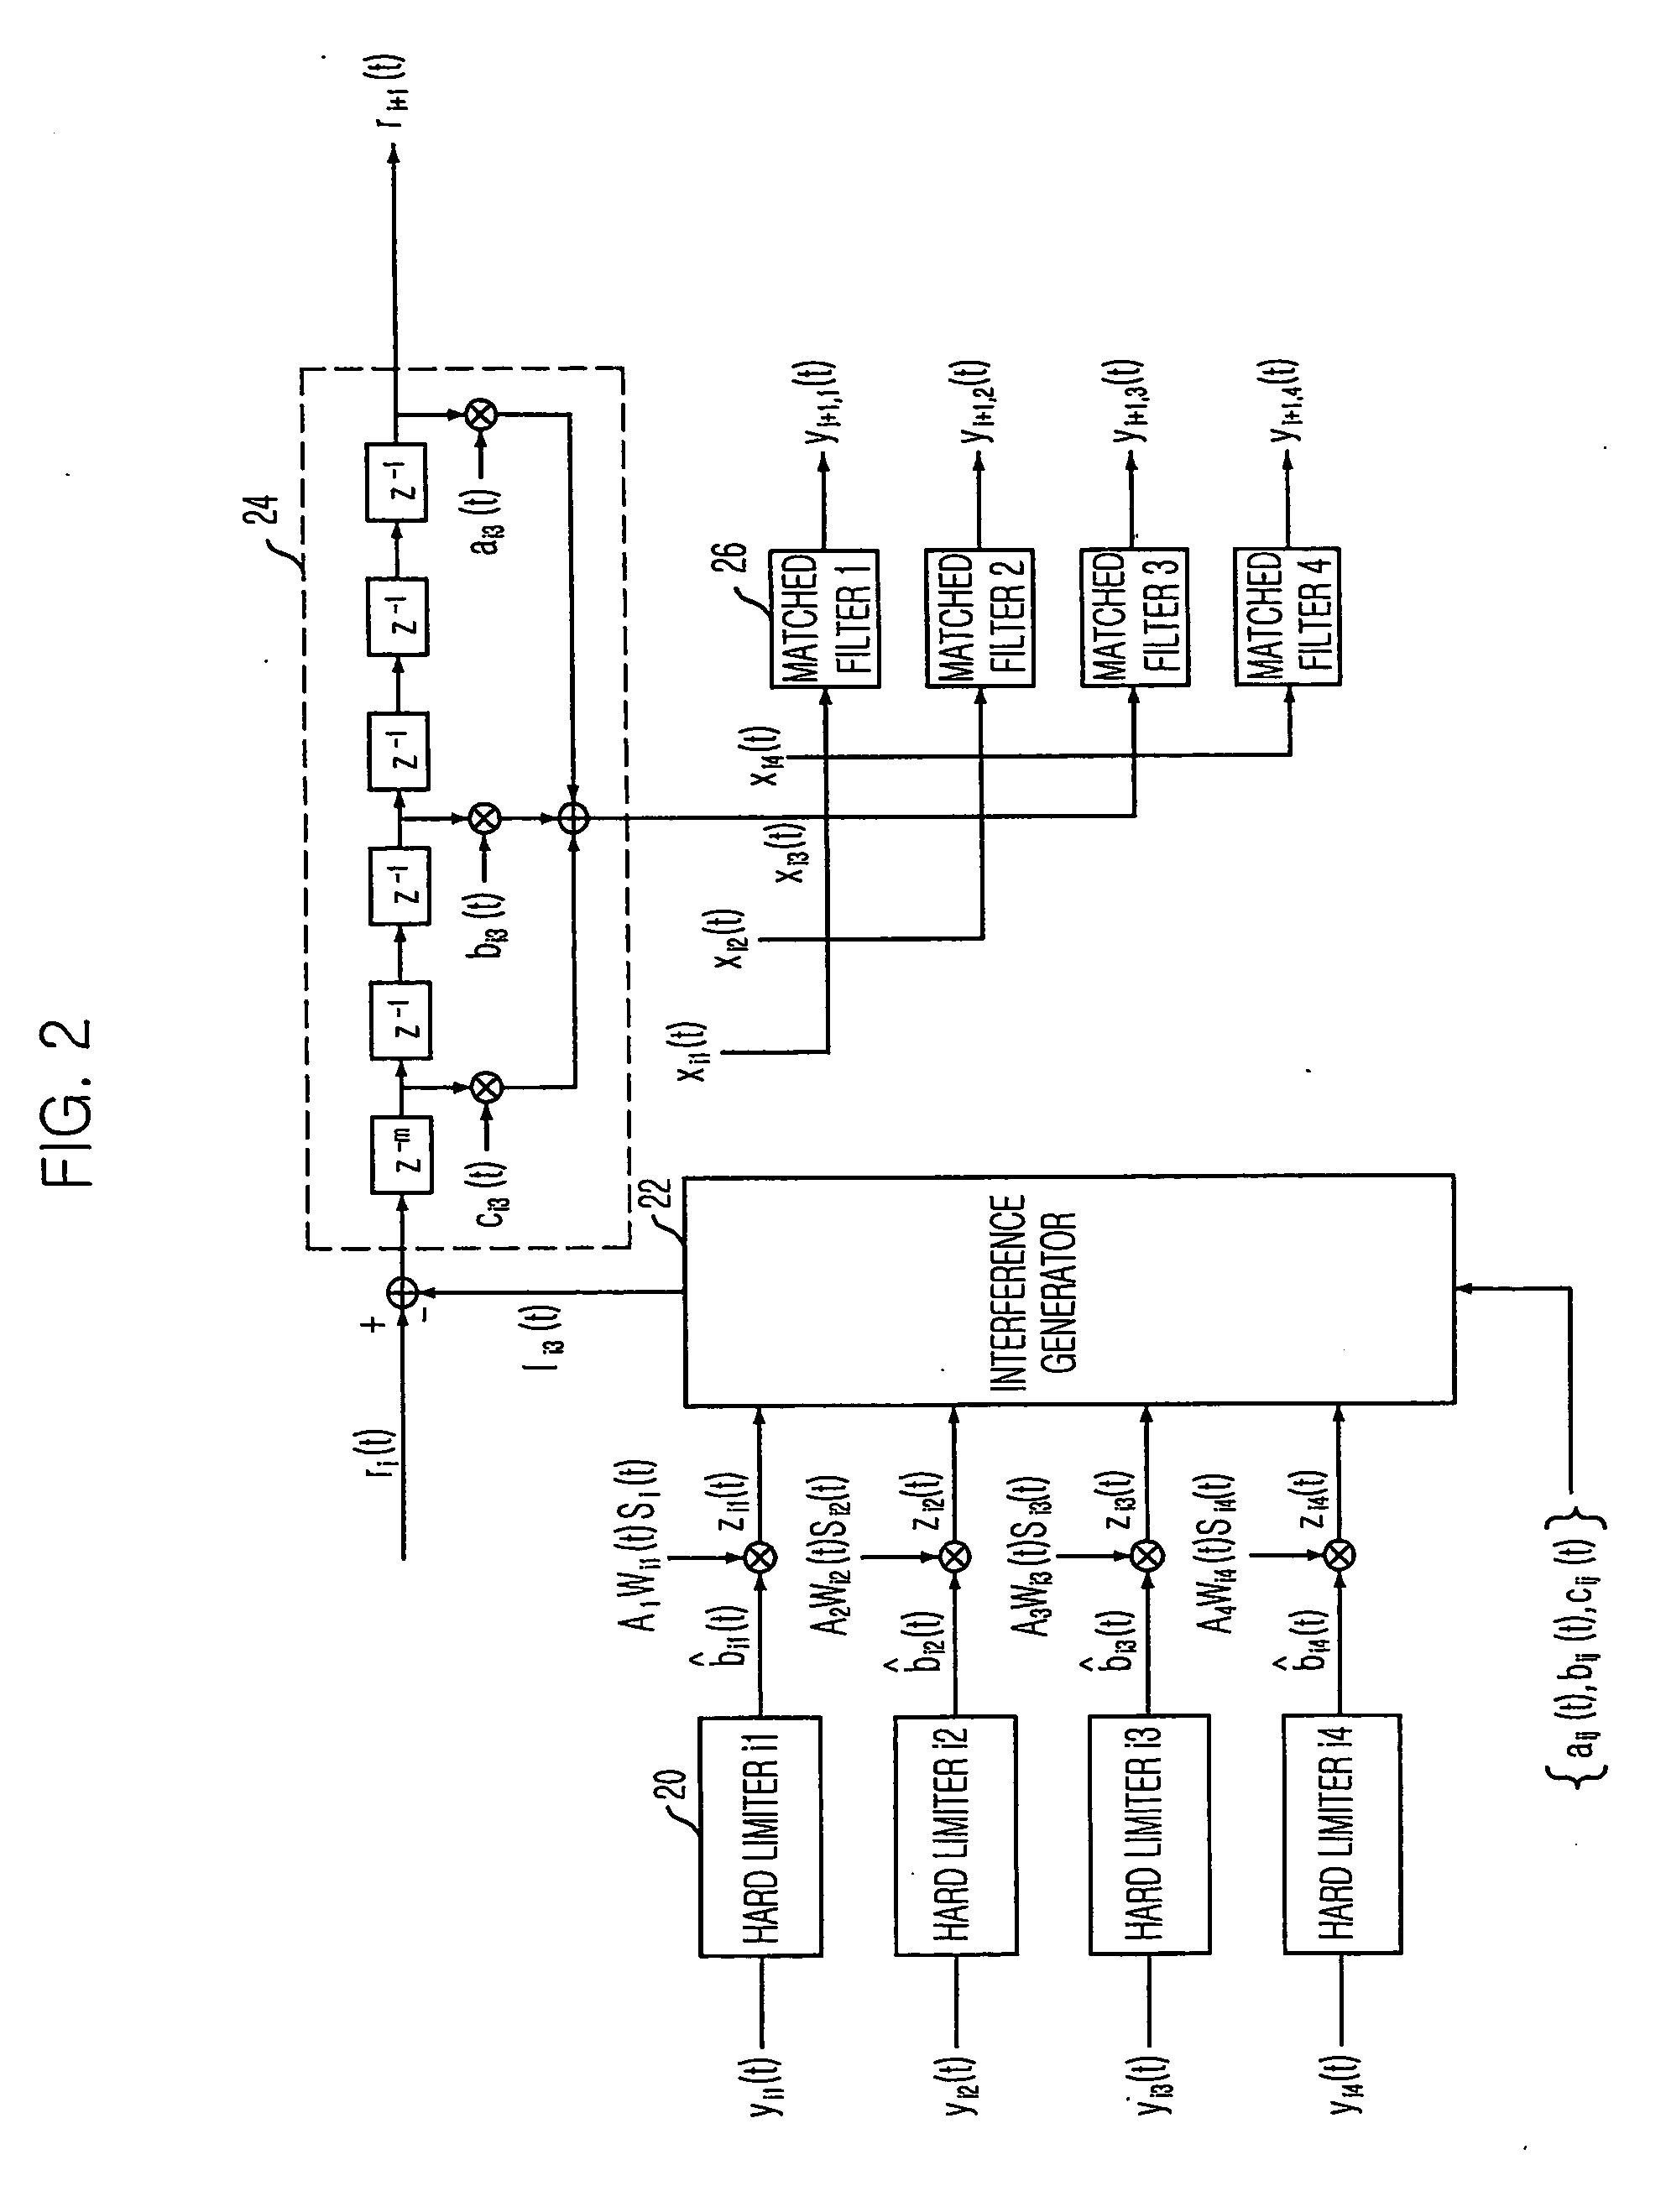 Multistage adaptive parallel interference canceller